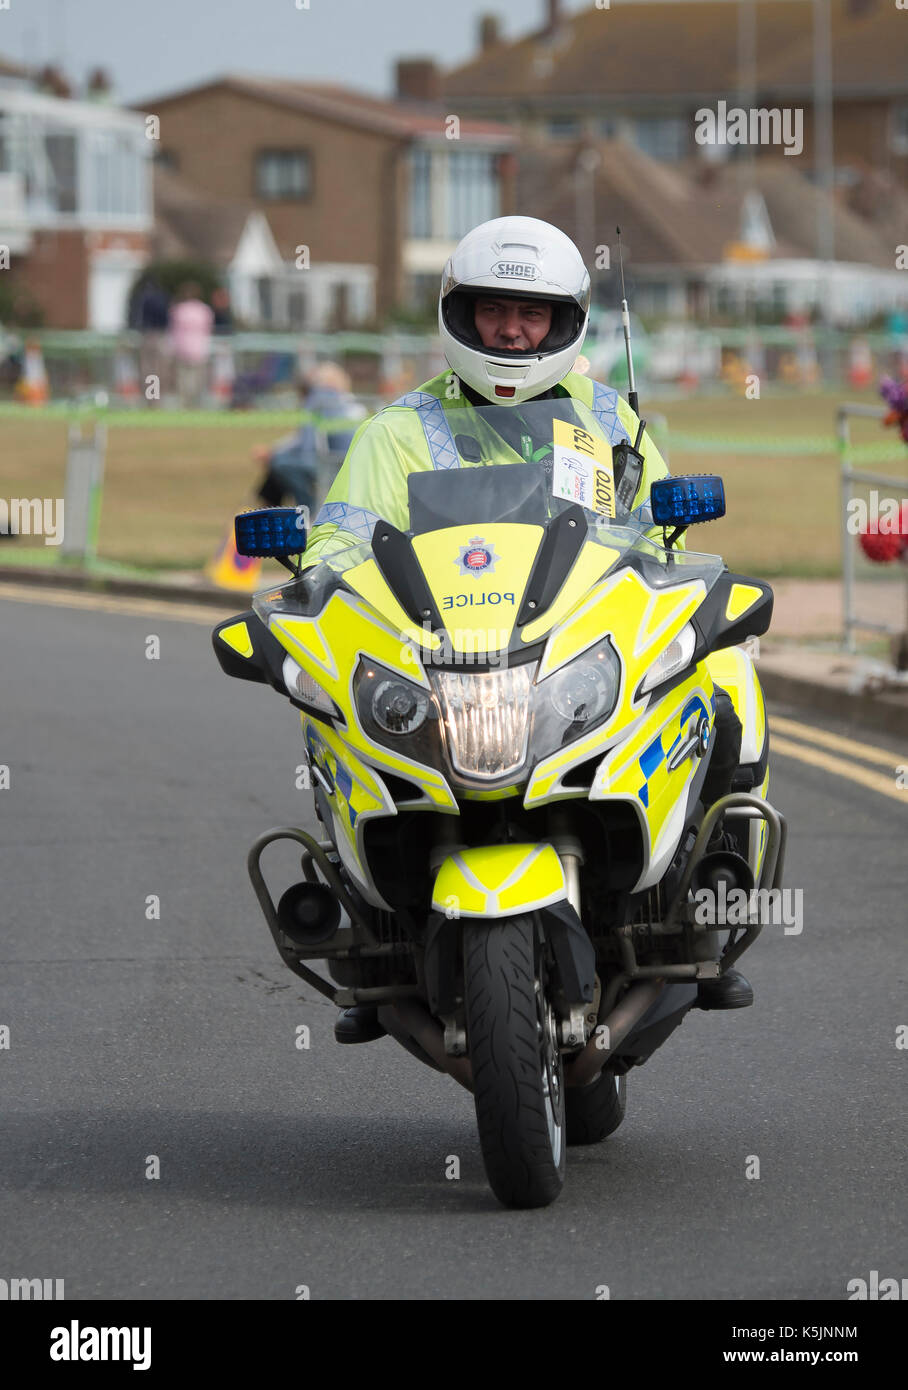 Police motor cycle escort rider at Clacton, Tour of Britain cycle race, 2017. Stock Photo